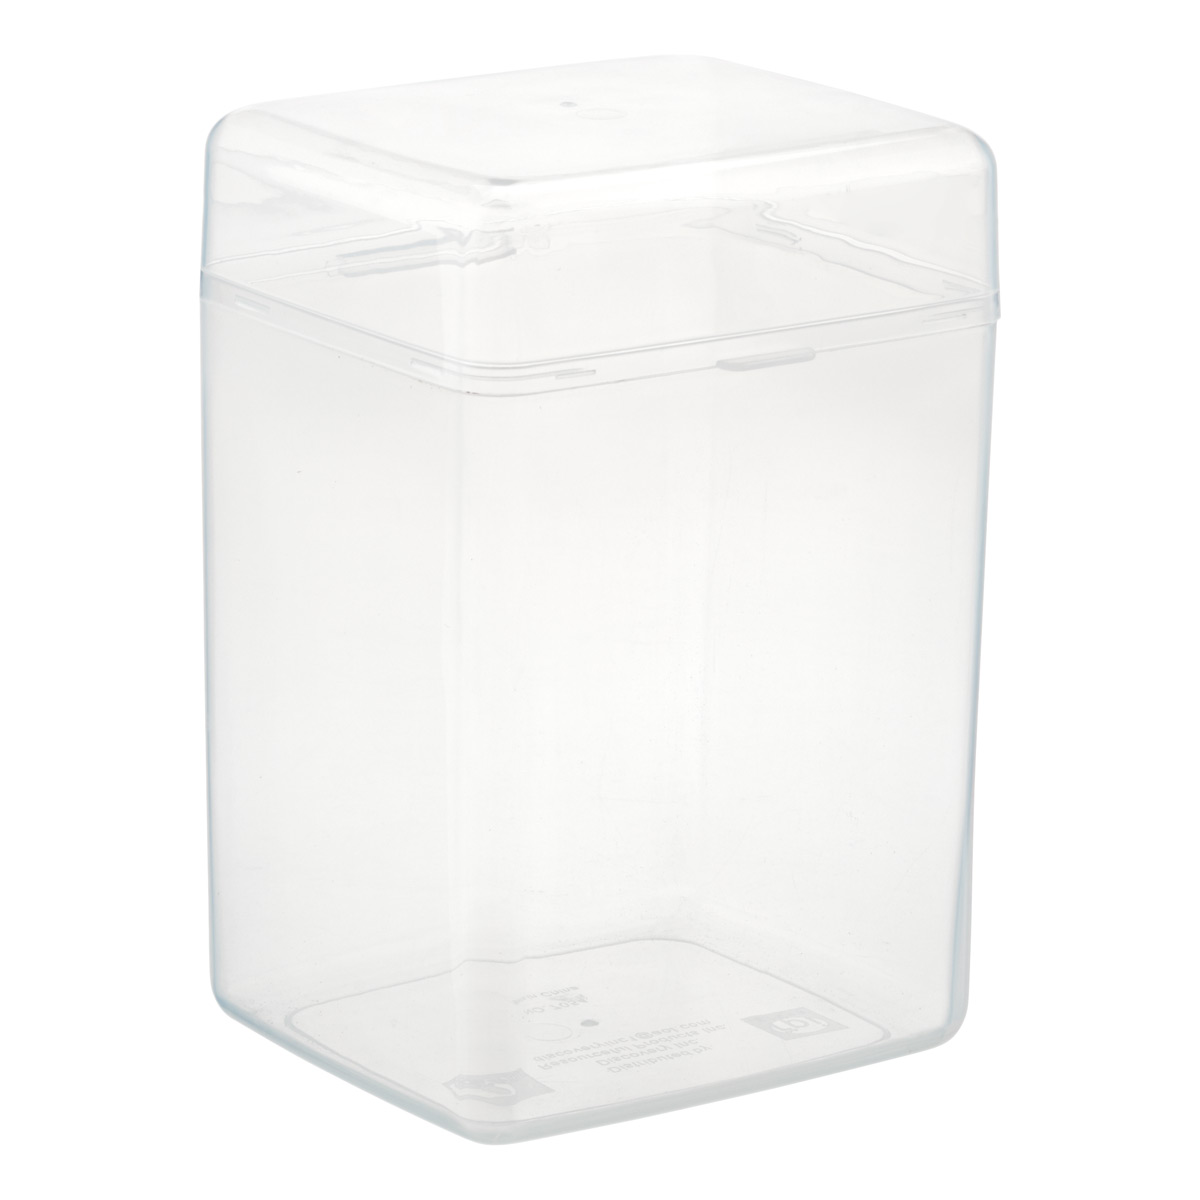 Stay Fresh Clear Flour Storage Container - Plastic Flour Canister for  Kitchen Pantry, Baking Needs - Holds 5LB Bag of Flour - Large Form-Fitting  Food